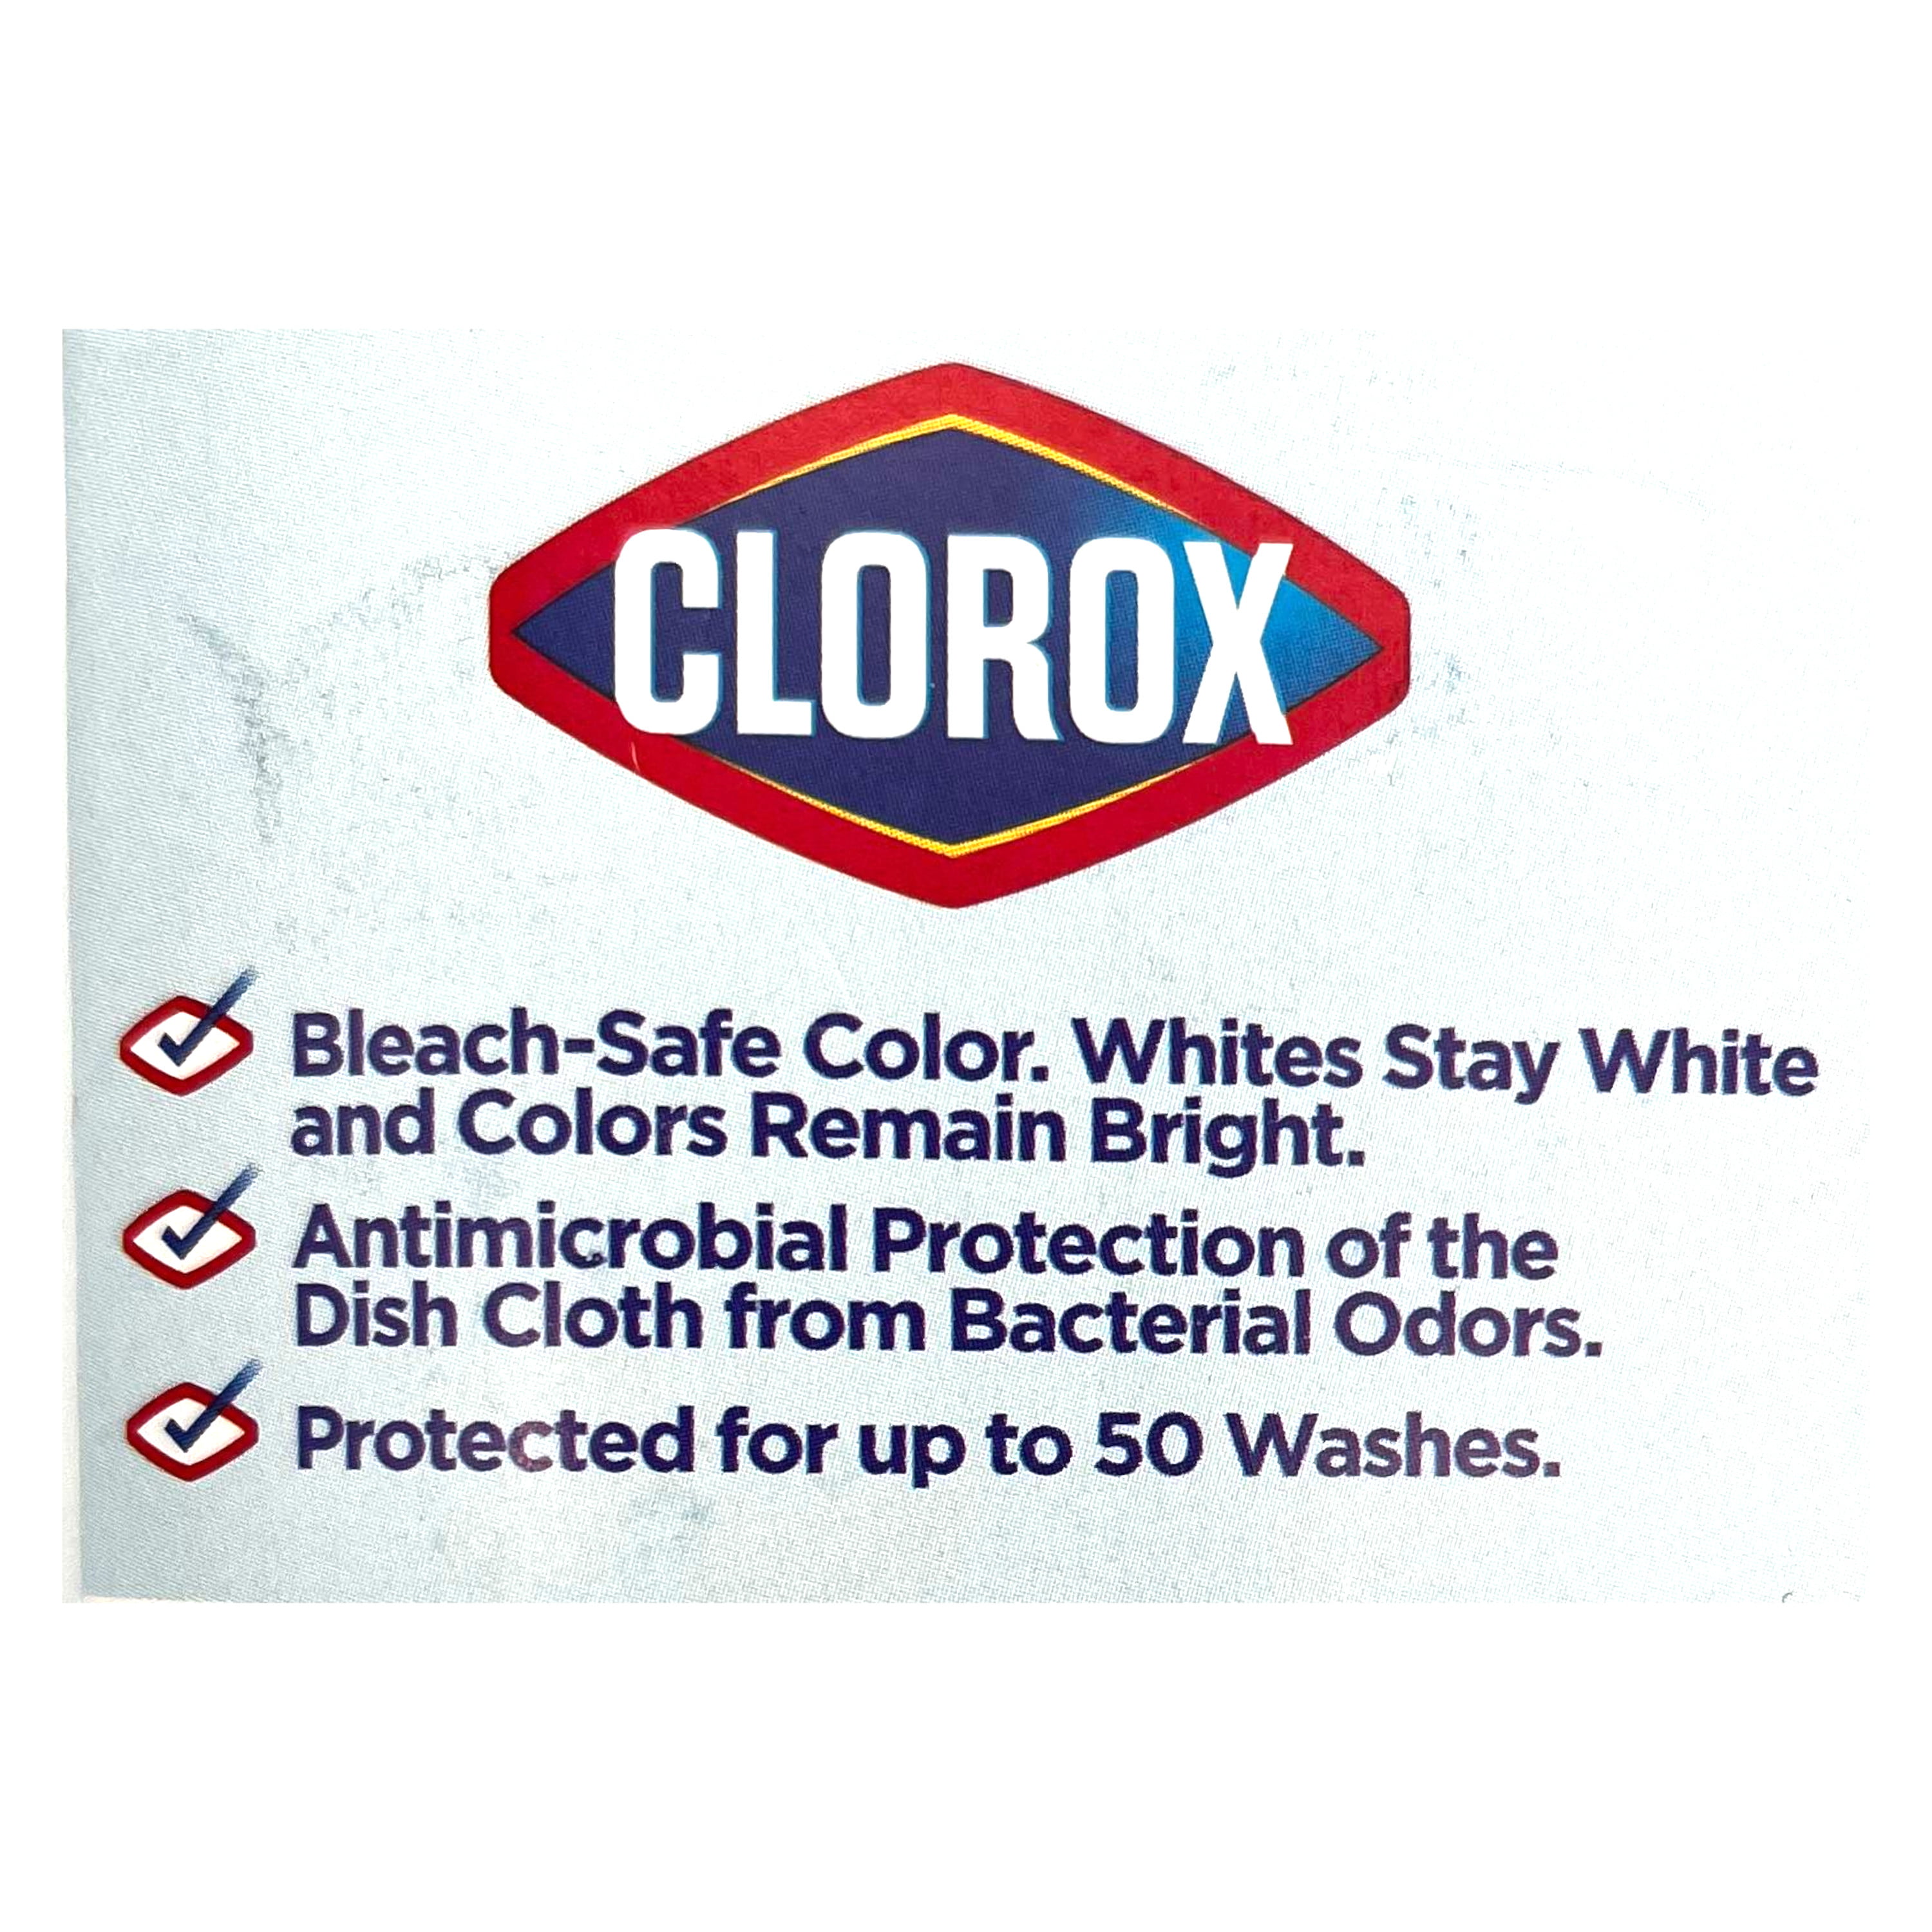 Clorox Dish Cloths - 6 Count (2 Packs of 3 Cloths), White With Grey Stripe  